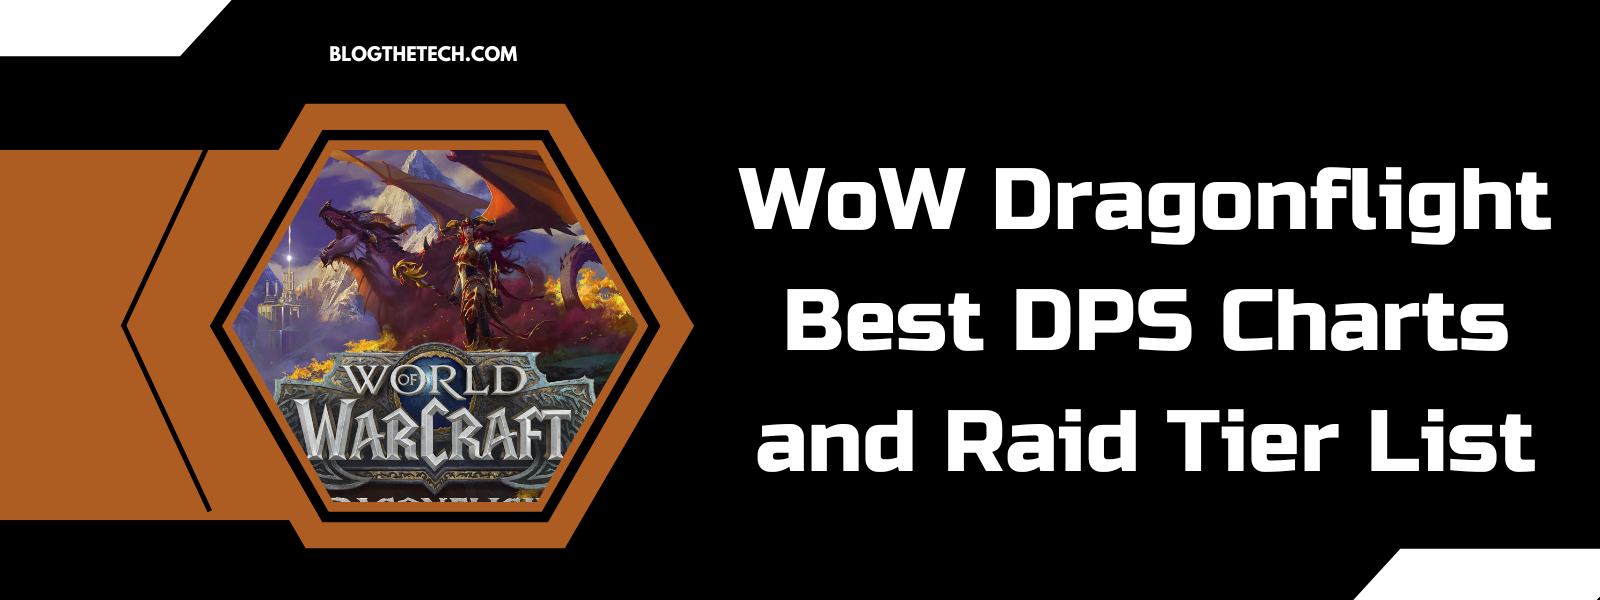 WoW Dragonflight — Best DPS Charts and Raid Tier List